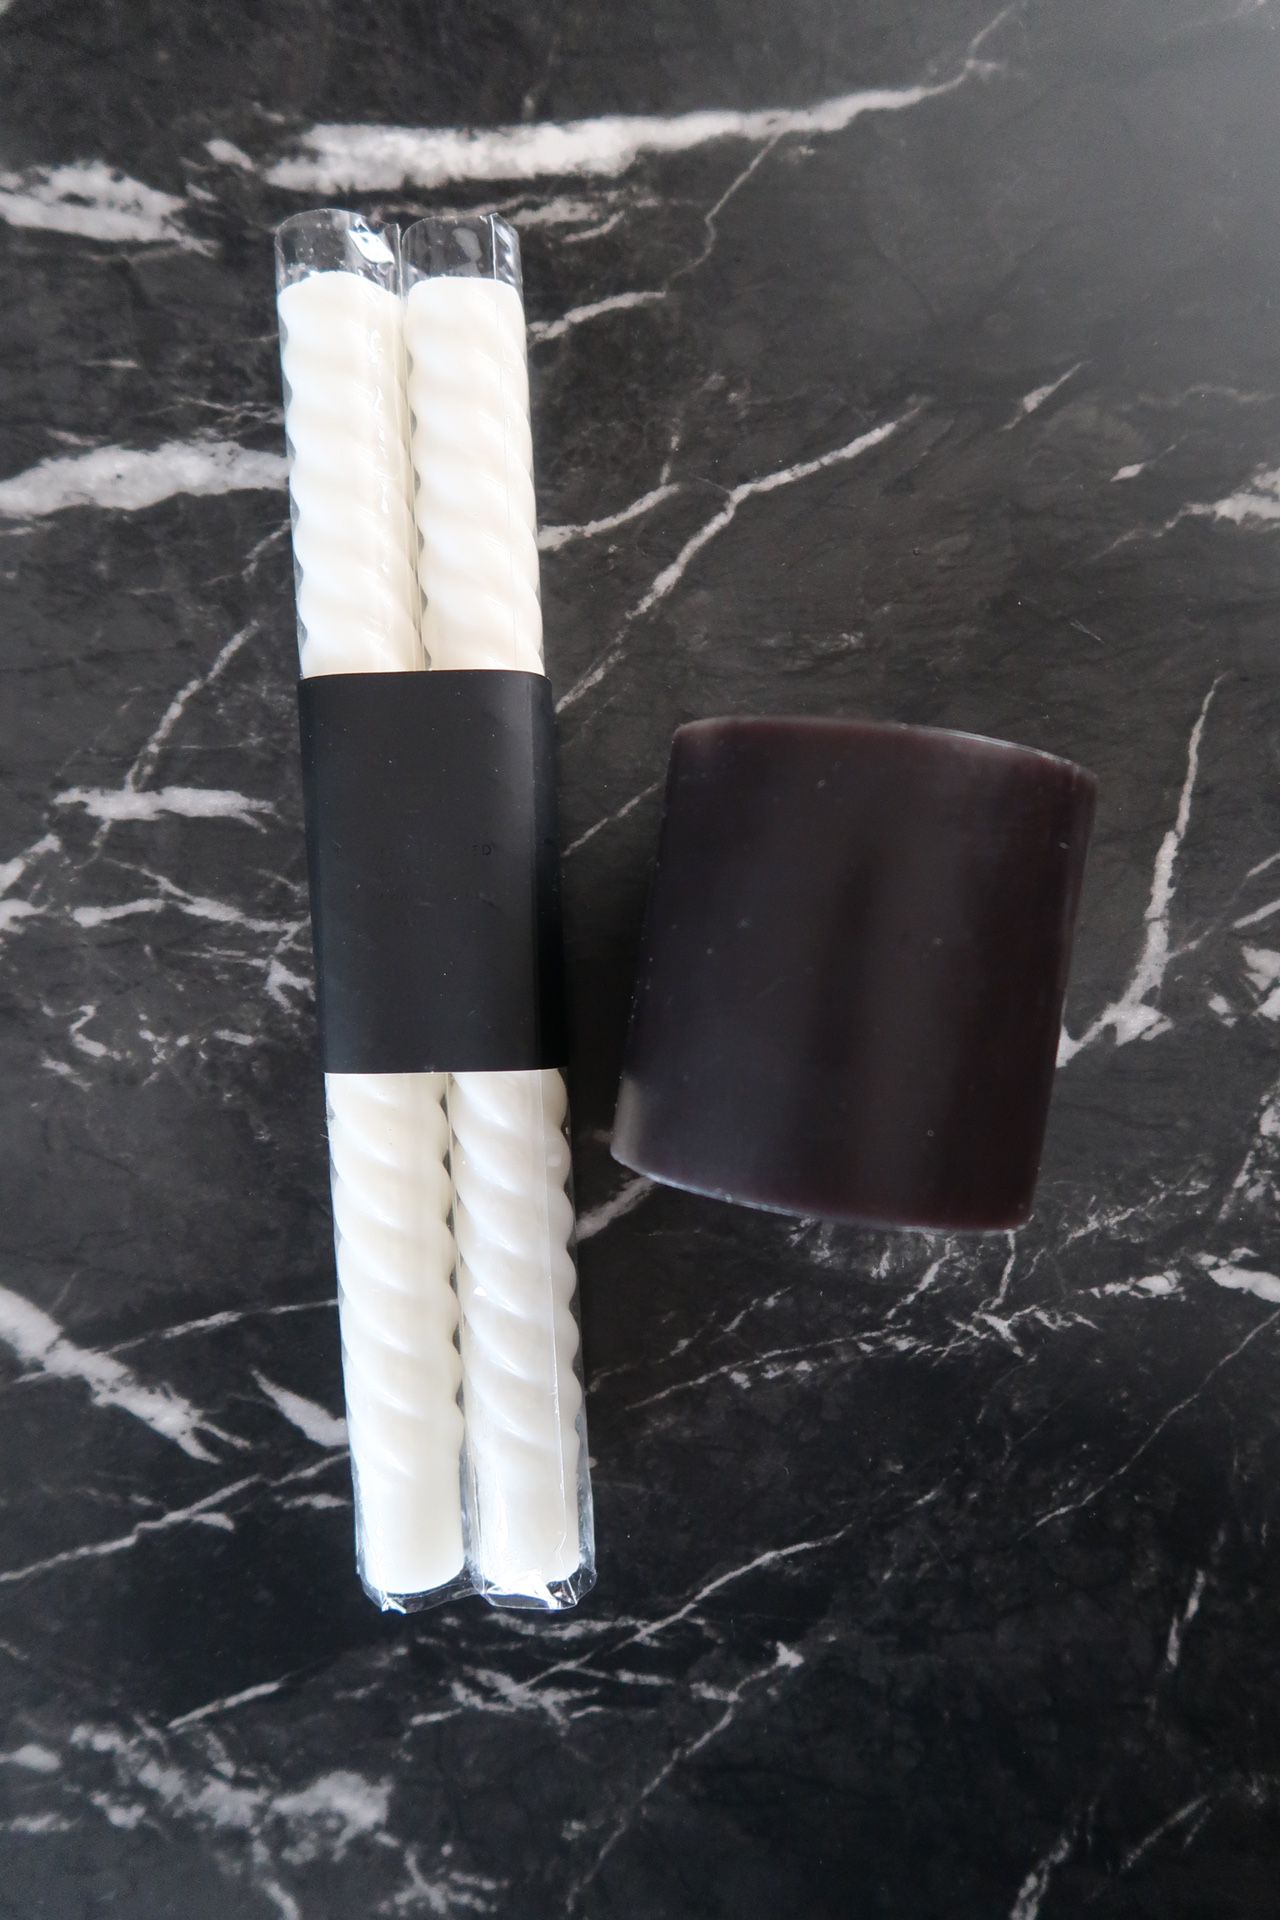 CB2 Candles • Twisted Winter White Taper Set & 3”x3” Black Pillar Candle